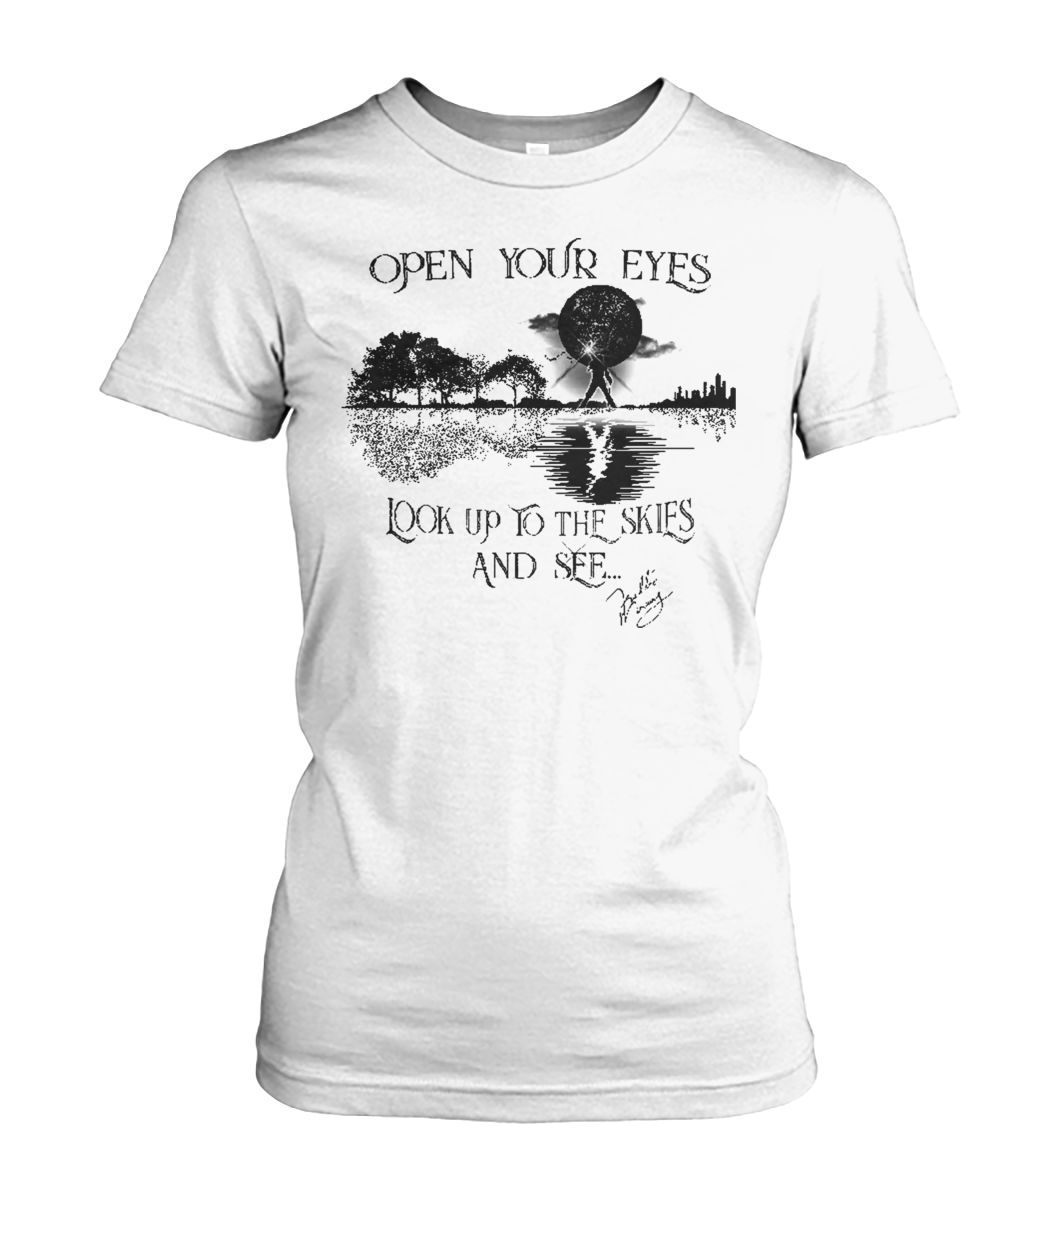 Guitar shadow open your eyes look up to the skies and see women's crew tee